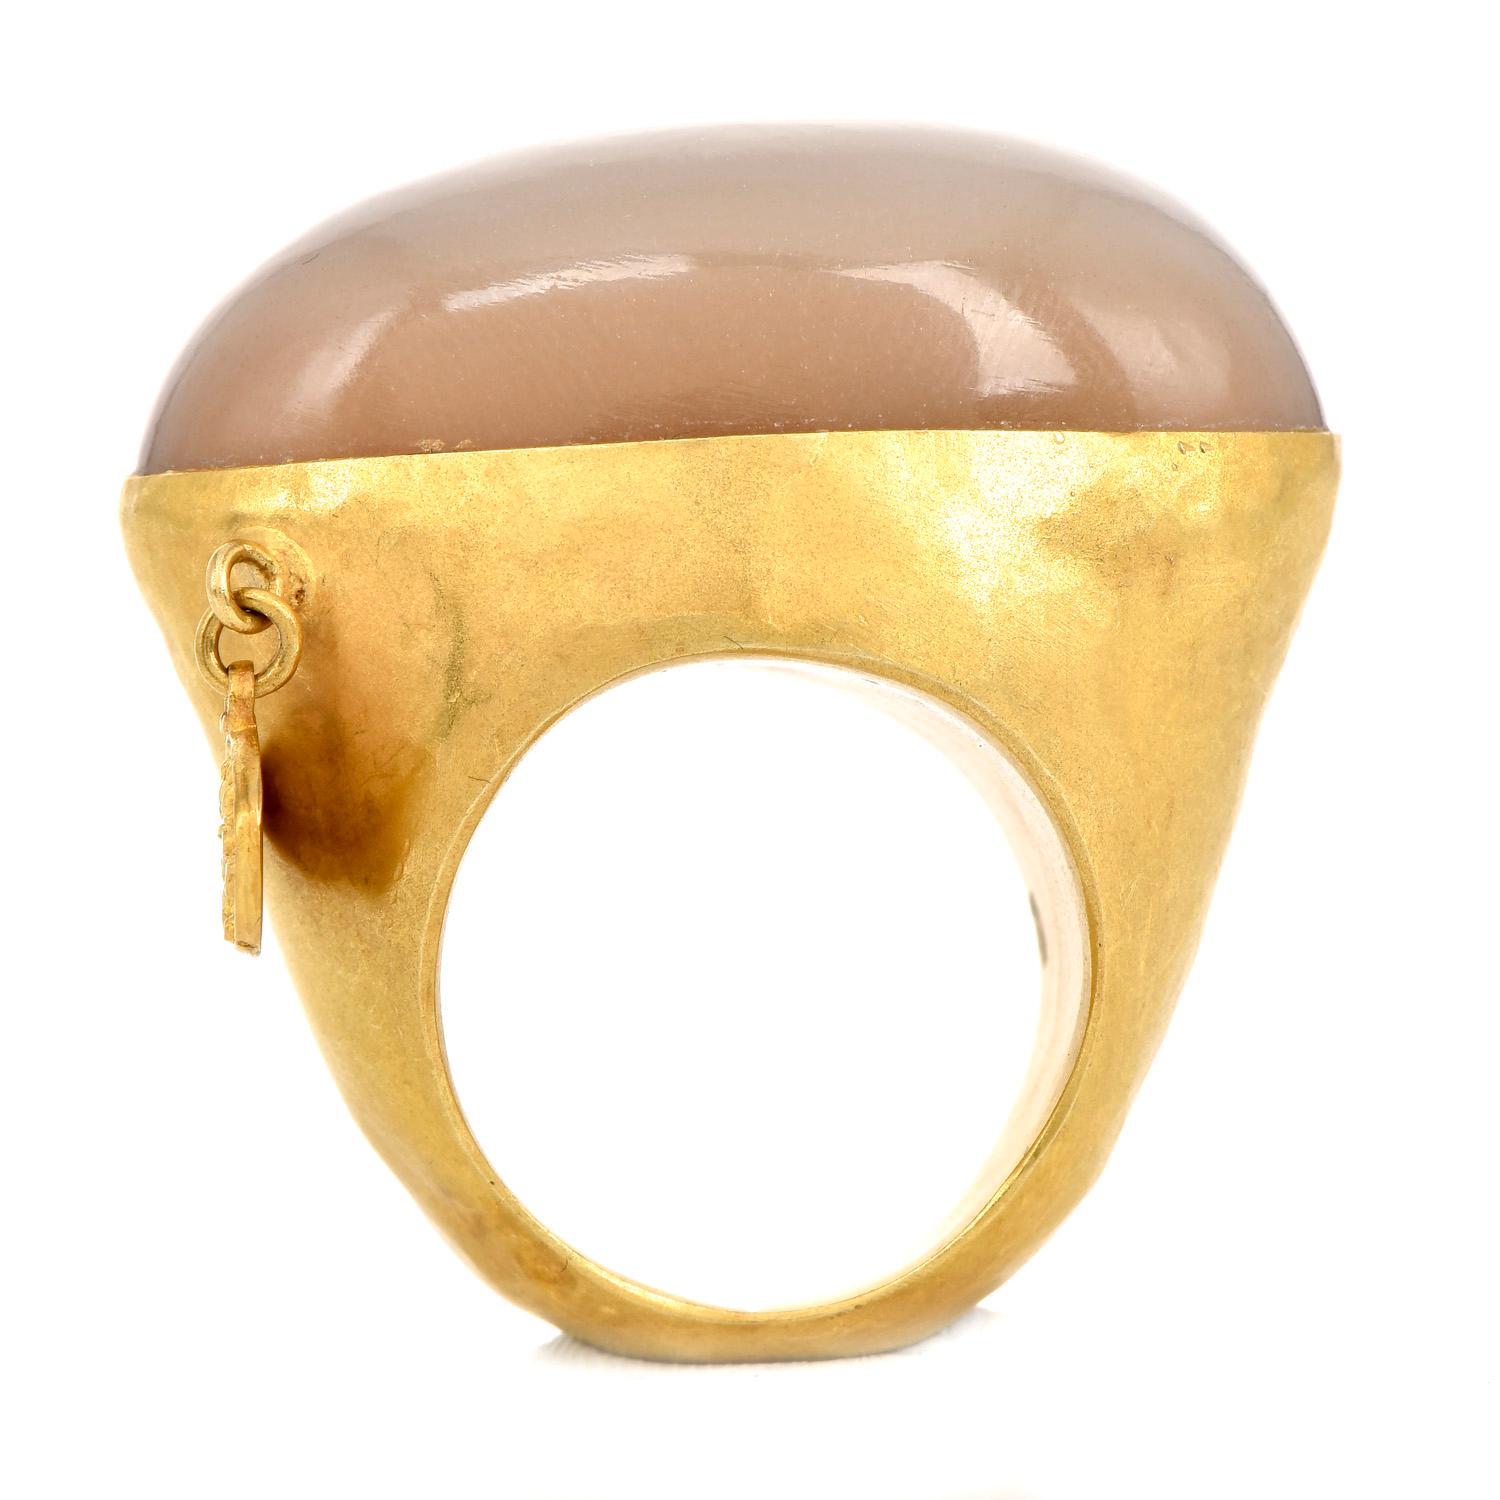  Stand out from the crowd with this attractive piece from the Canadian- Persian Designer Jaleh Farhadpour,

This stunning ring is hand-crafted in 18 karats yellow gold with a satin finish, hosts one Large Cats Eye Cabochon oval stone, measuring